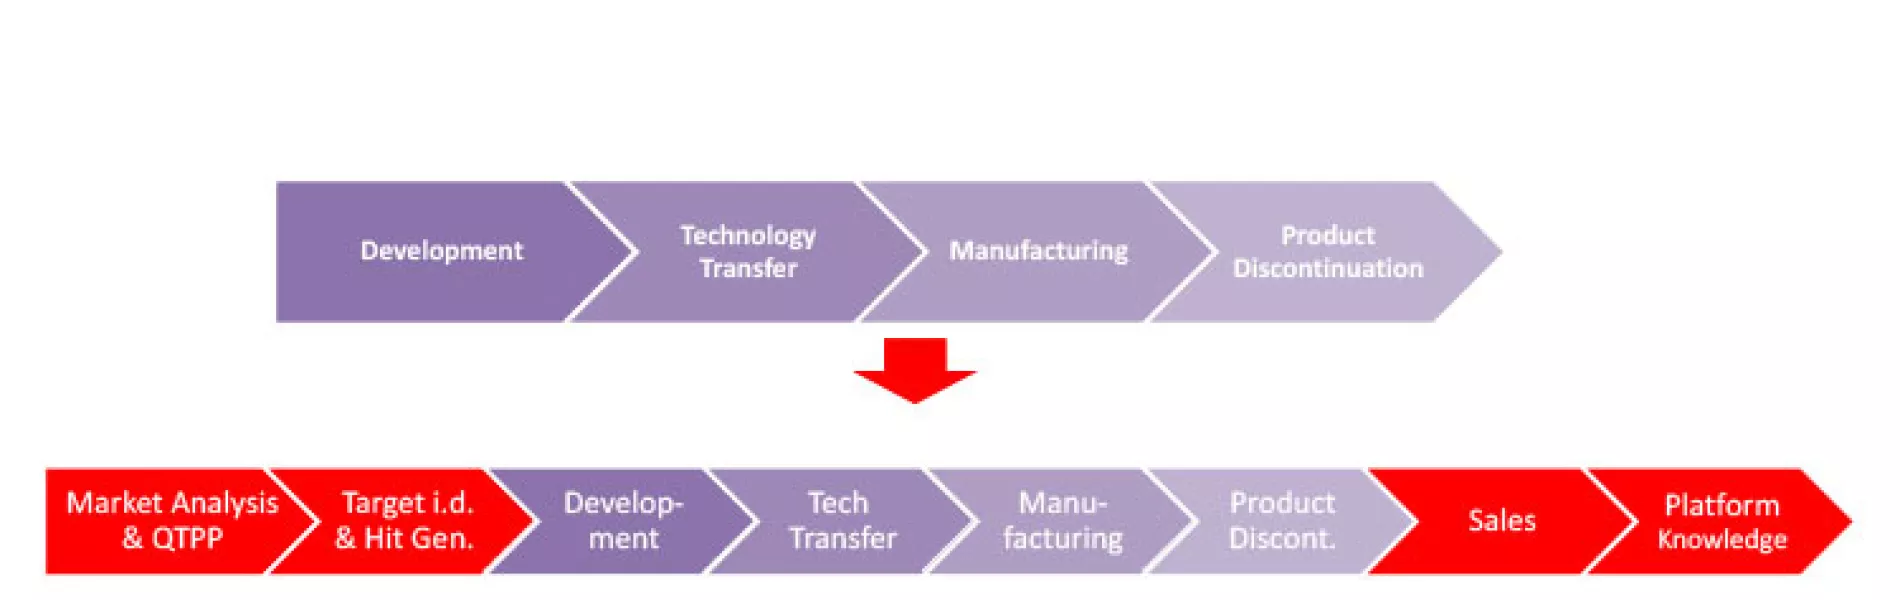 Effect of Industry 4.0 enablers on the product life cycle.